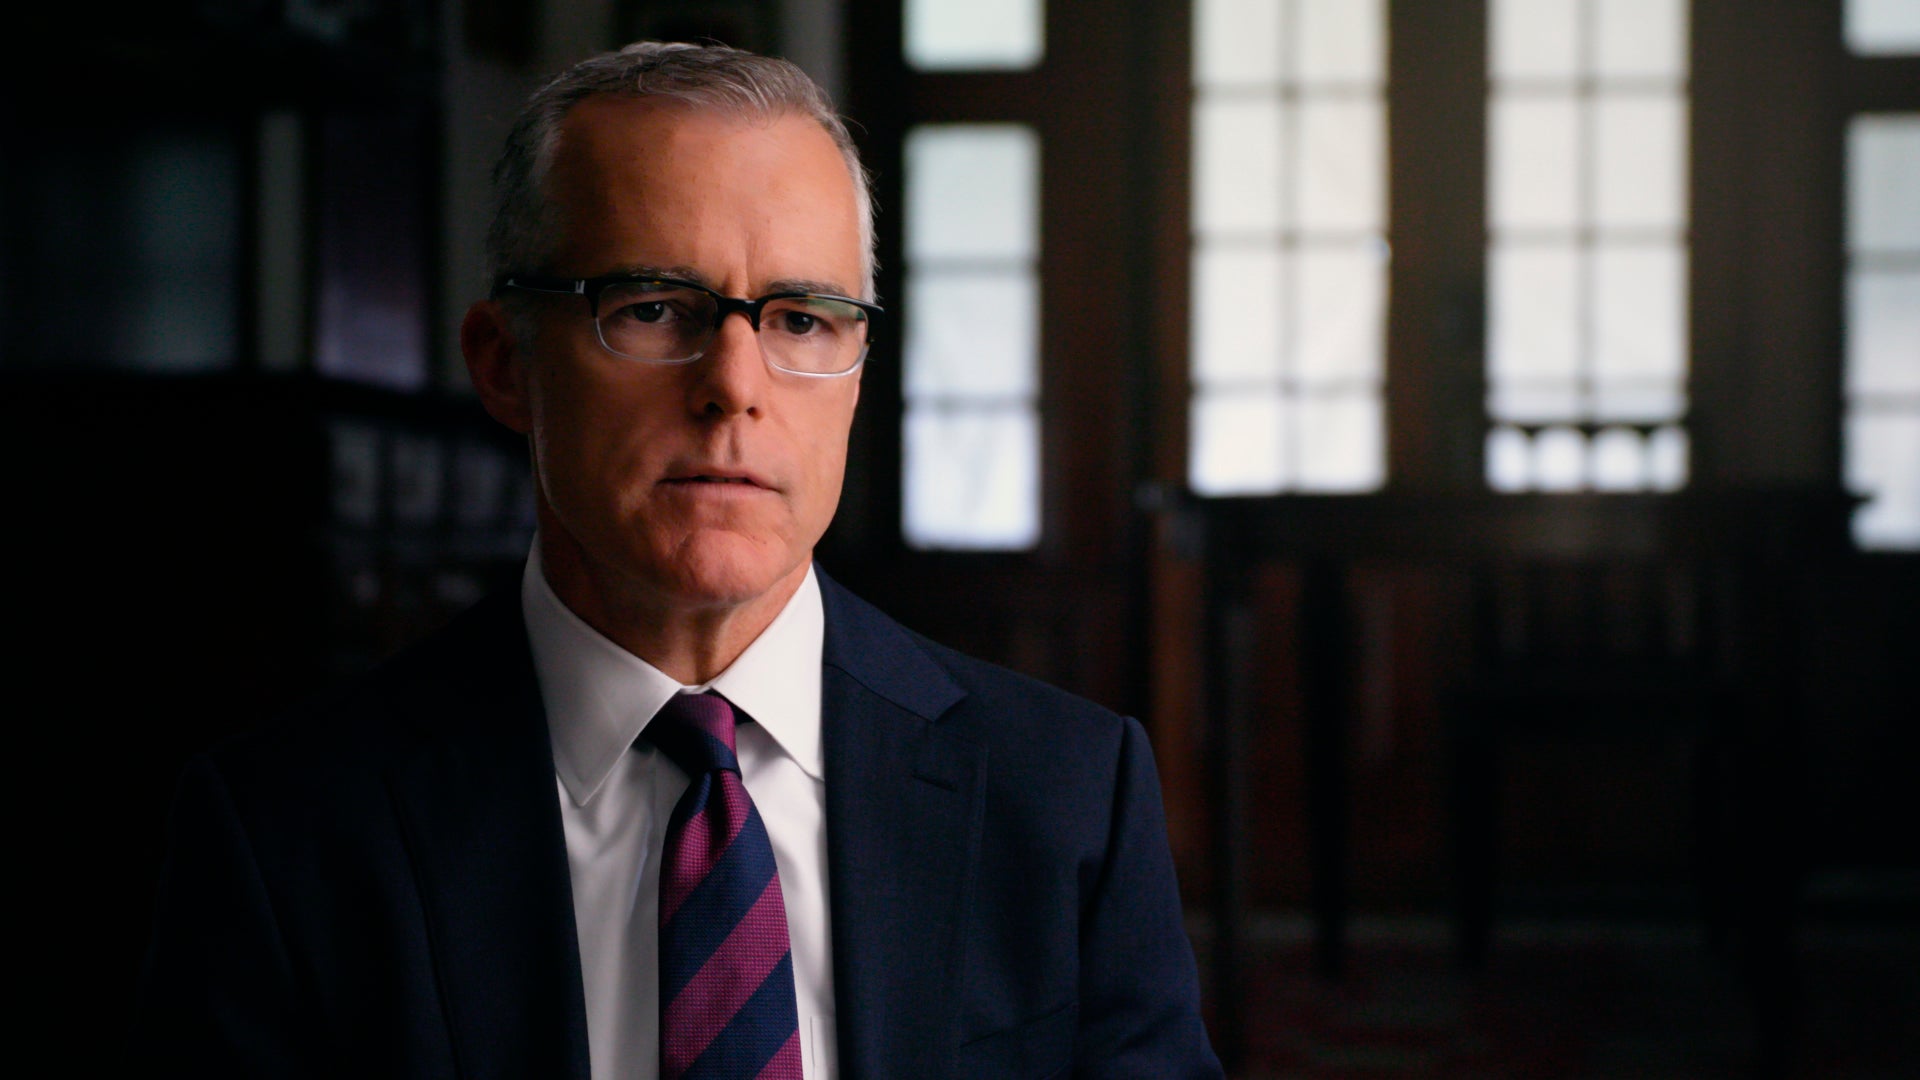 Andrew McCabe has warned of the threat of further violence at the US Capitol